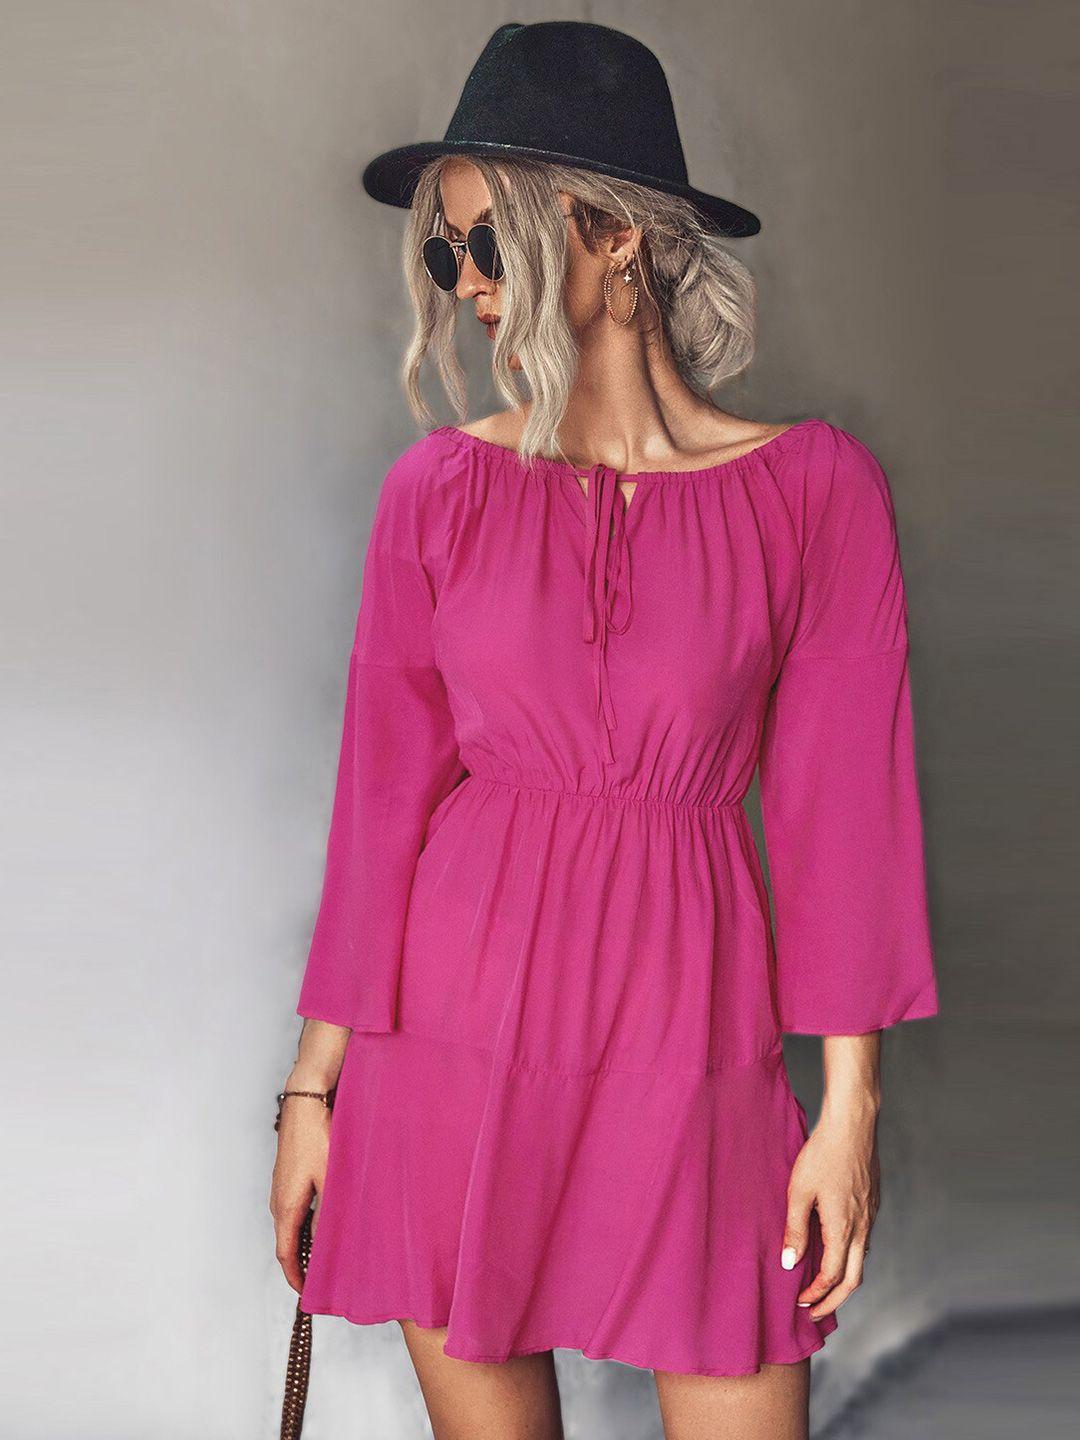 stylecast pink tie-up neck flared sleeves fit & flare mini dress